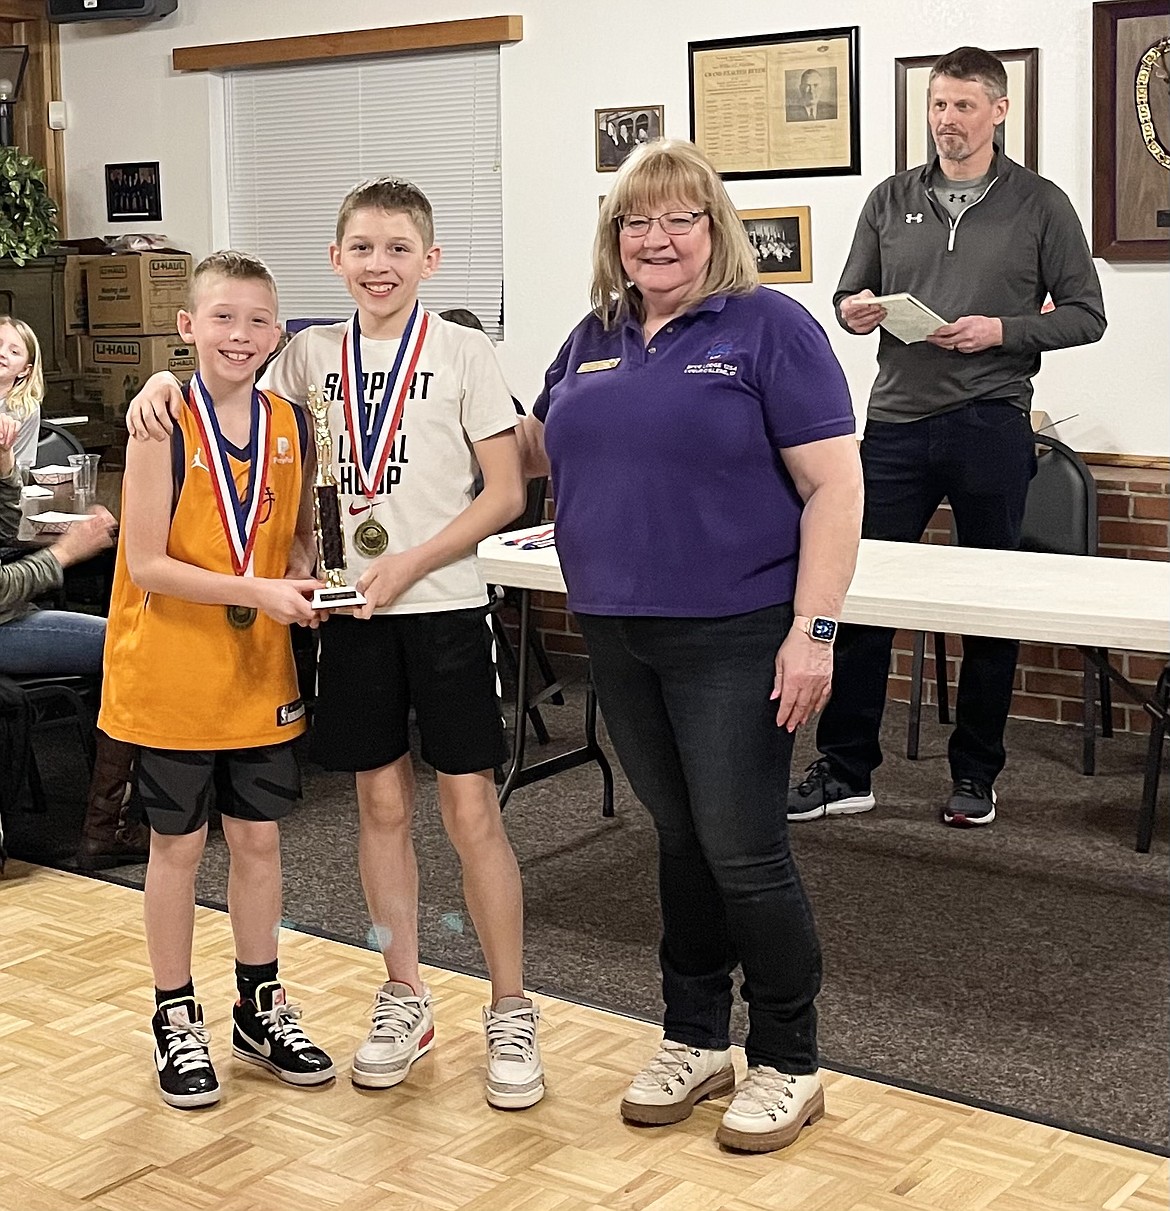 Courtesy photo
Maddox Hodges, left, and Micah Hodges won the Waide Hamner (Top Gun) Award as the top boys overall scorer at the Coeur d'Alene Elks Hoop Shoot held Feb. 20 at The Courts at Real Life in Post Falls. Also pictured is Debbi Nadrchal, Elks Exalted Ruler, and Todd Stoddard, Hoop Shoot director.